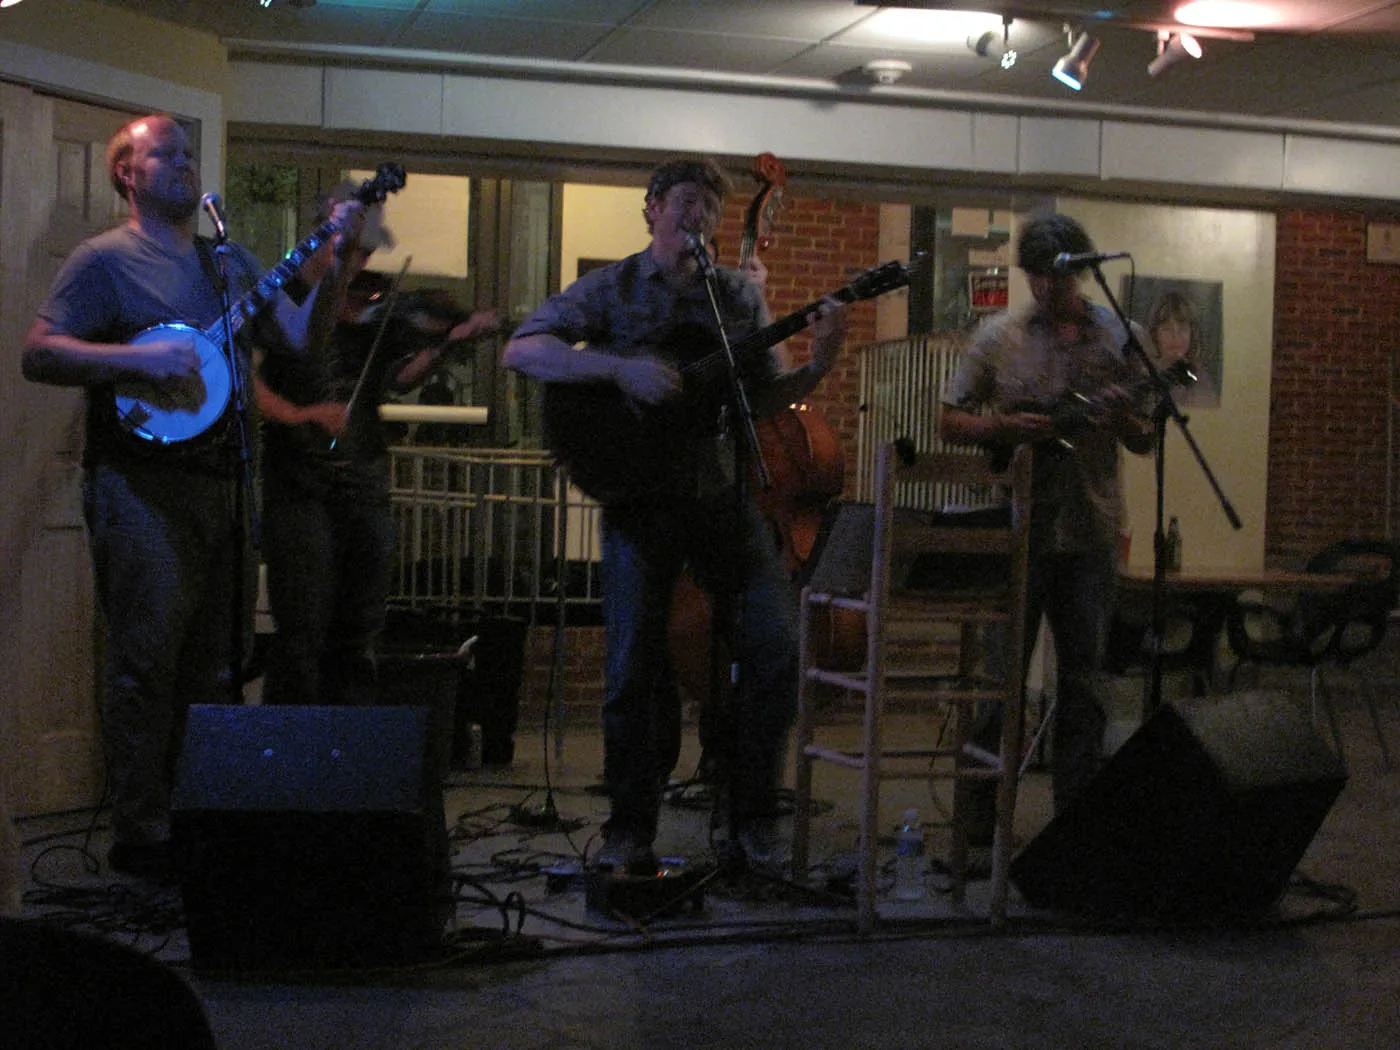 80s cover bluegrass band at the Southern in Charlottesville, Virginia.